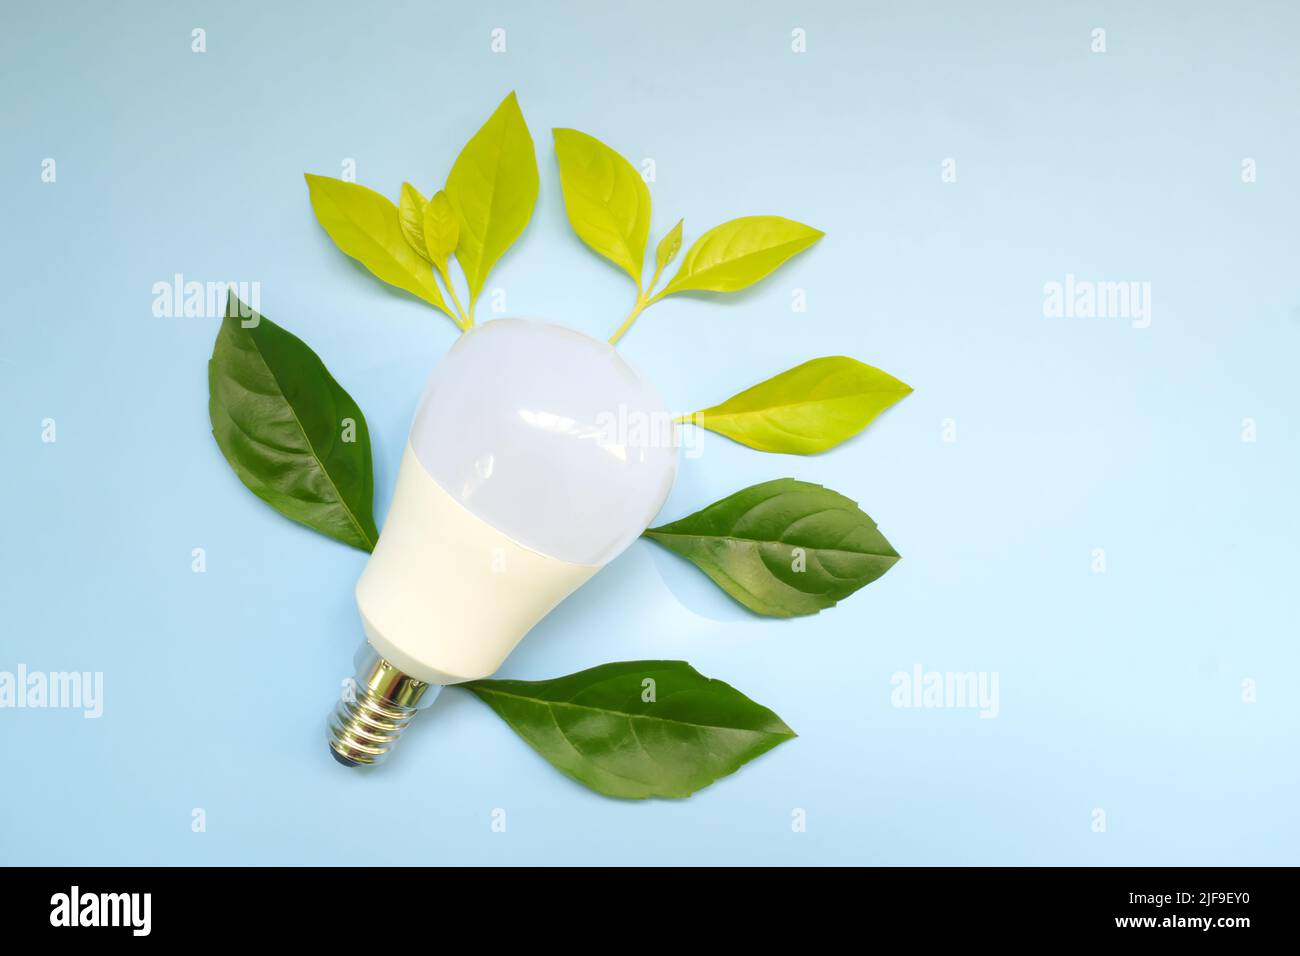 Save electricity, lights off, idea and innovation environmental conservation concept. Light bulb with fresh green leaves flat lay. Stock Photo